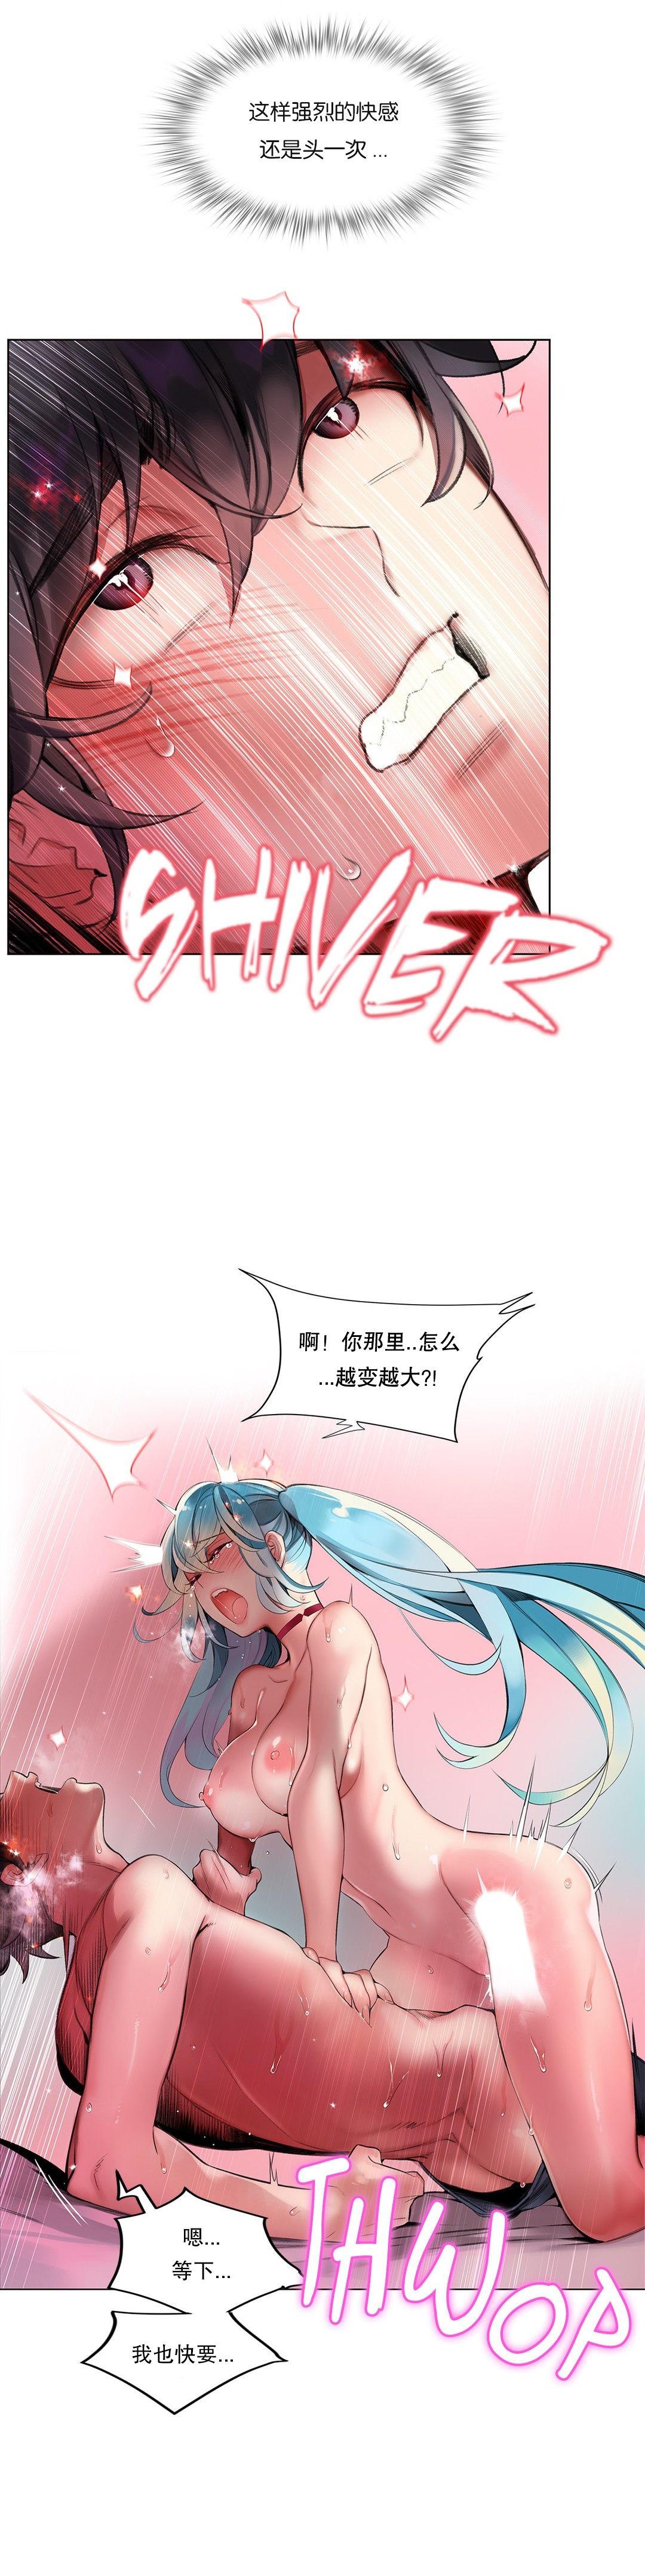 [Juder] Lilith`s Cord (第二季) Ch.61-65 [Chinese] [aaatwist个人汉化] [Ongoing] 181